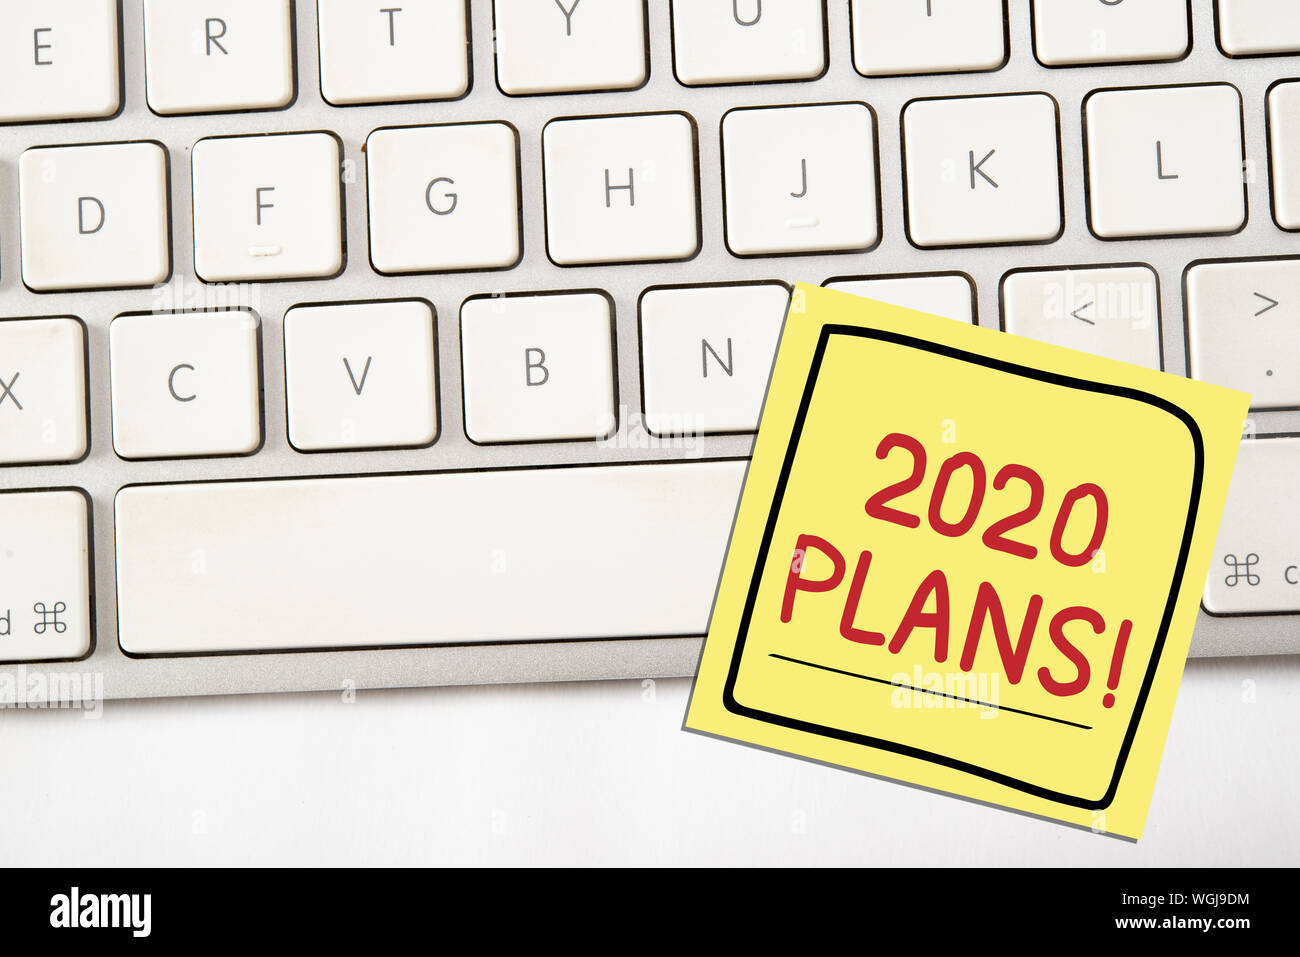 Text of 2020 plans on notice paper with computer keyboard, planning concept Stock Photo